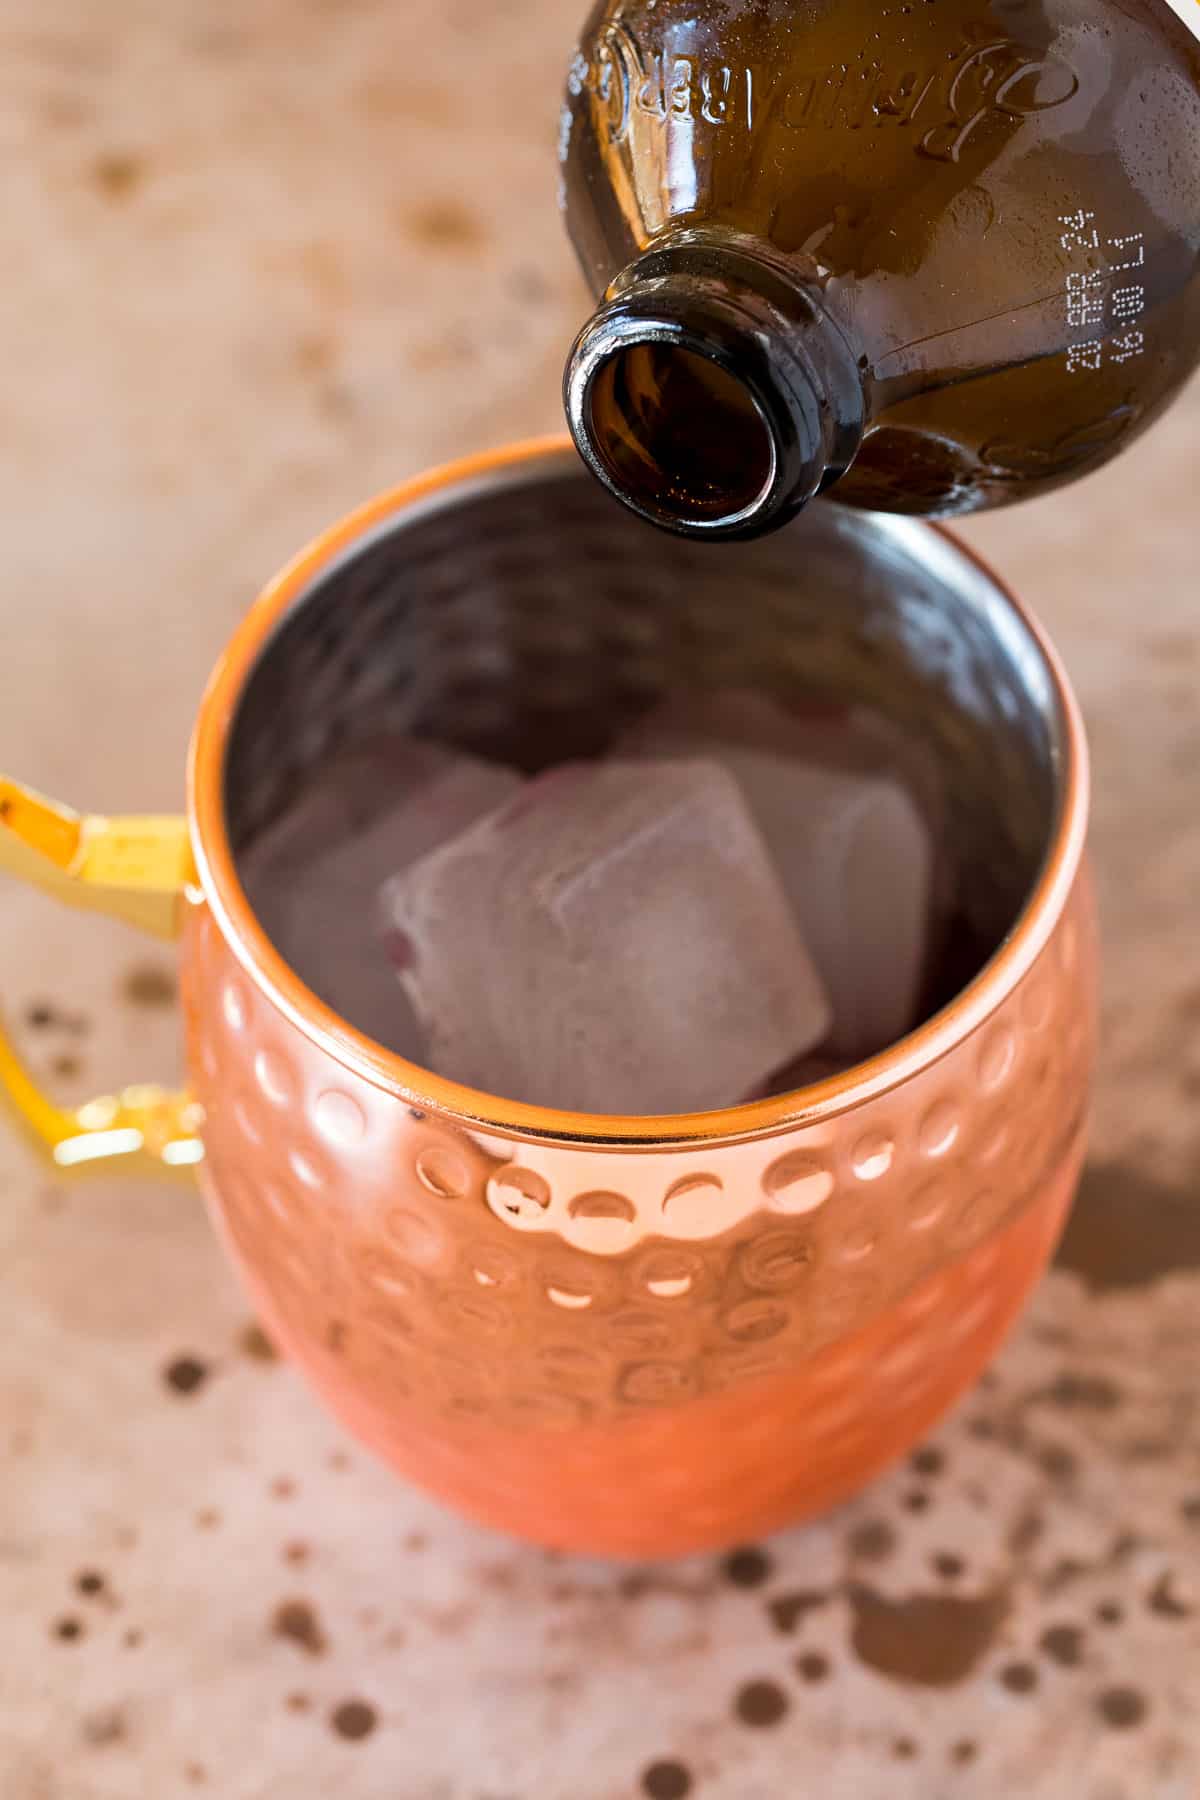 Ginger beer being poured into a mug.